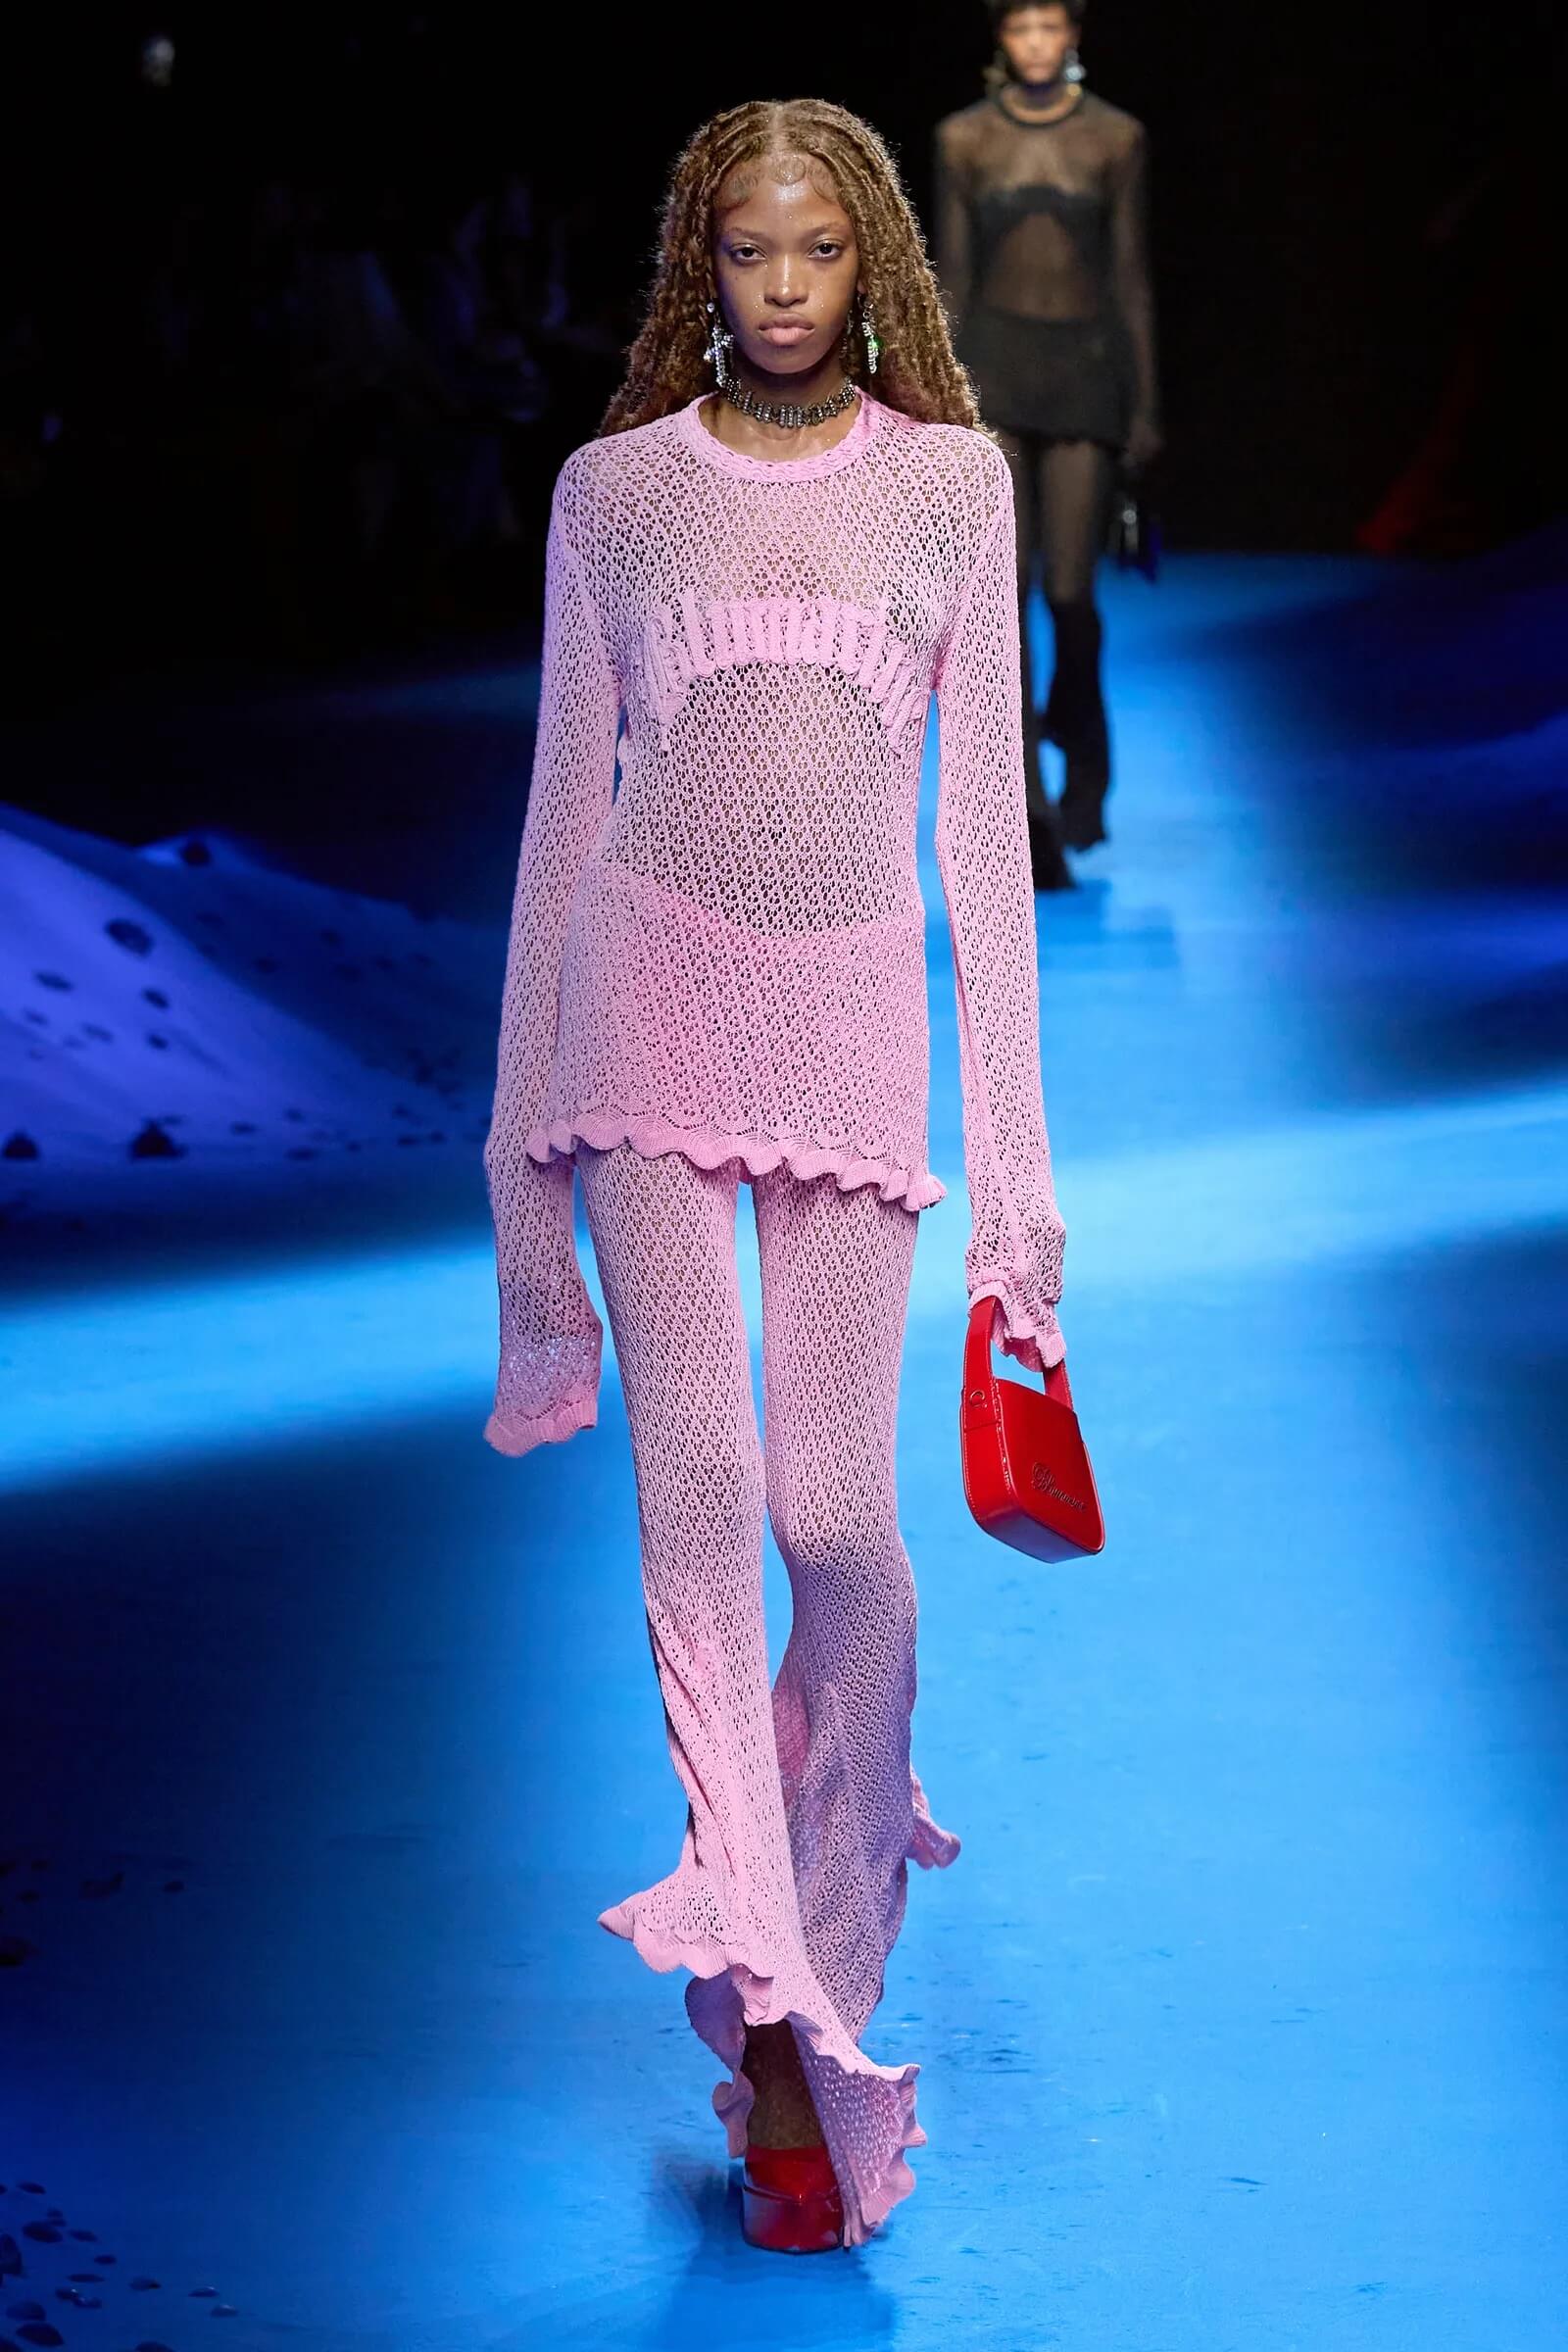 Blumarine Brings Y2K Body Glitter and Holographic Hair to the Runway